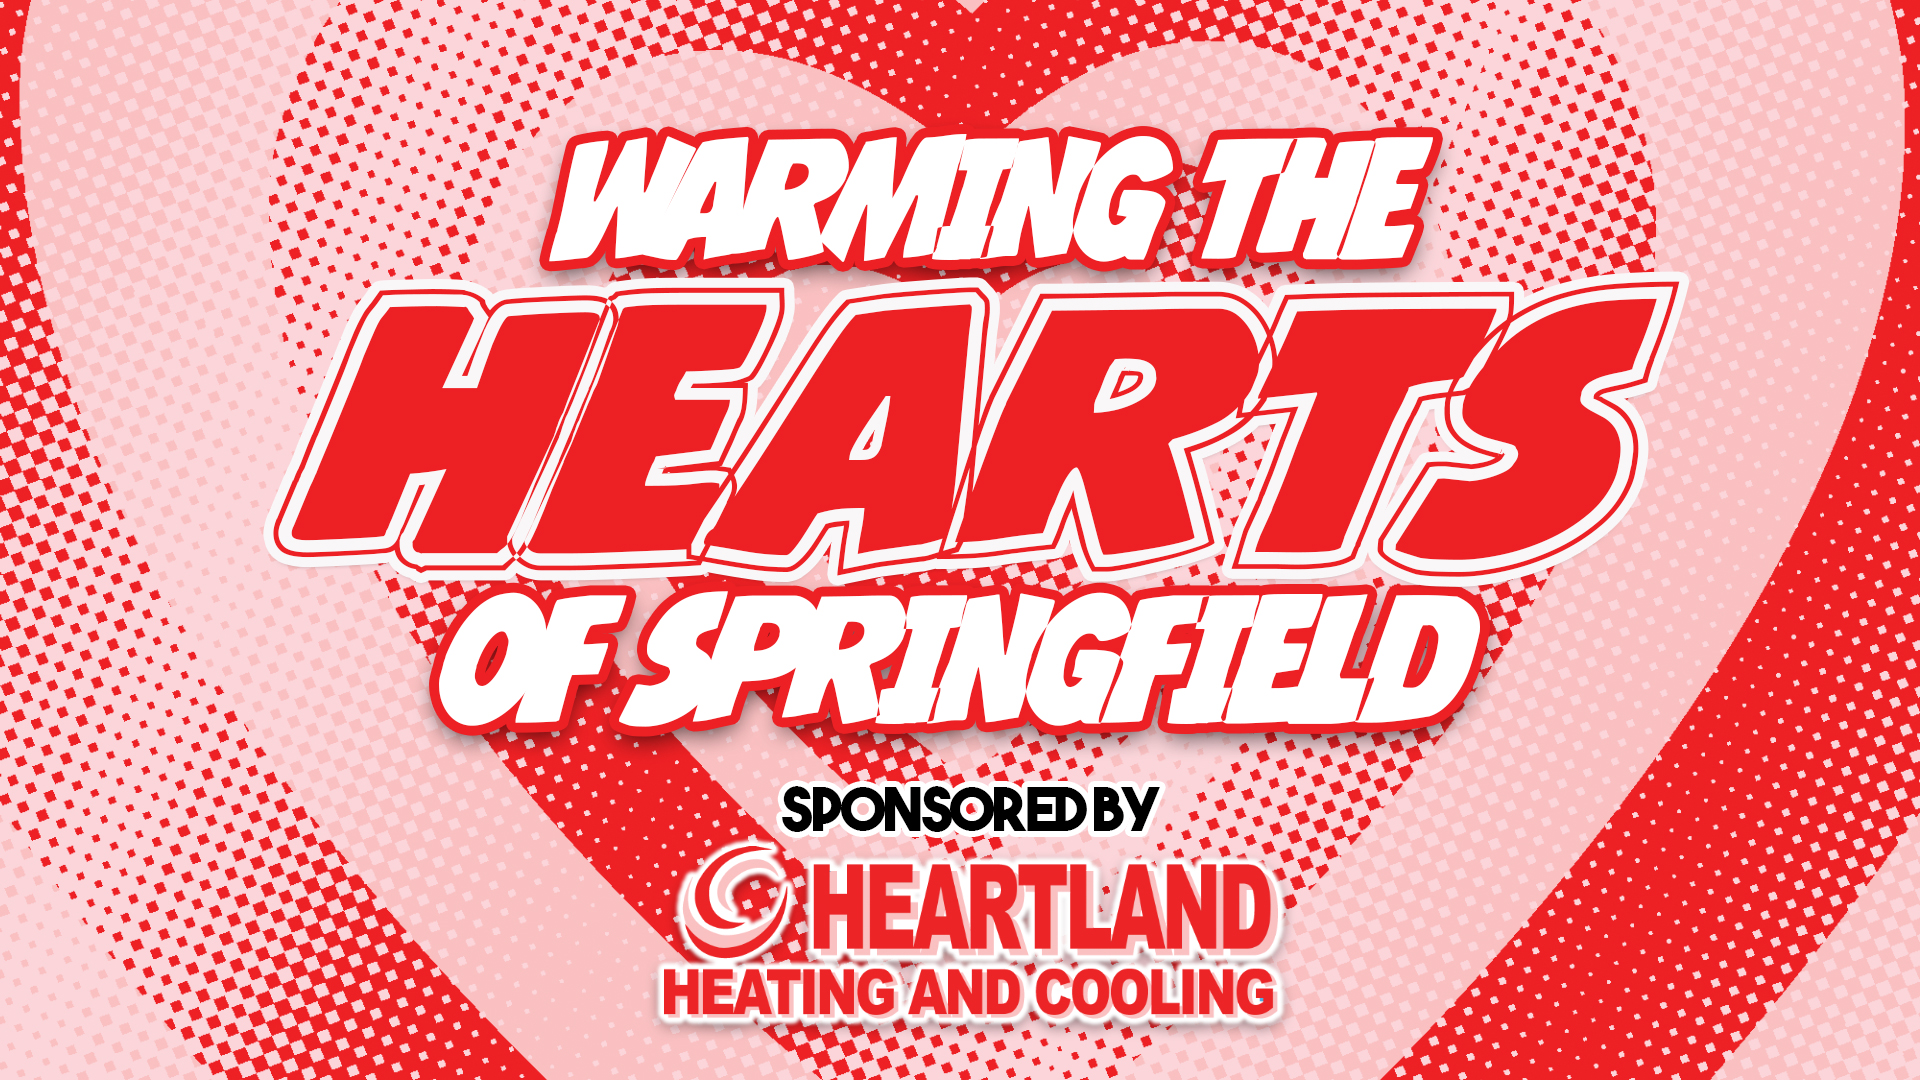 Warming The Hearts Of Springfield Presented By Heartland Heating